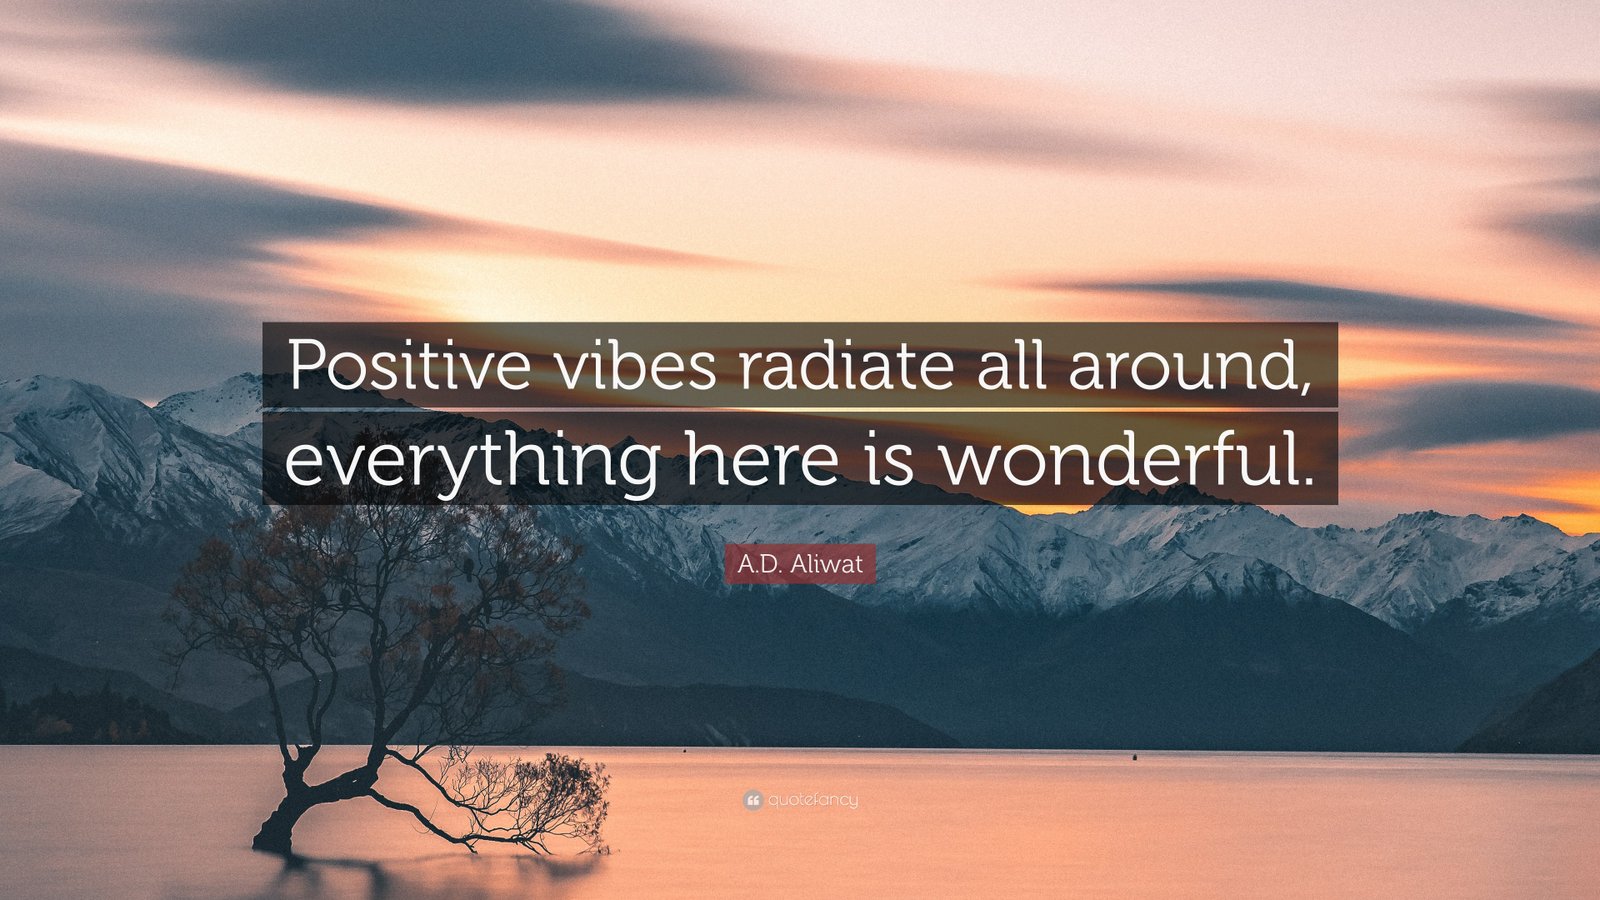 How Positive Quotes Can Change Your Mindset